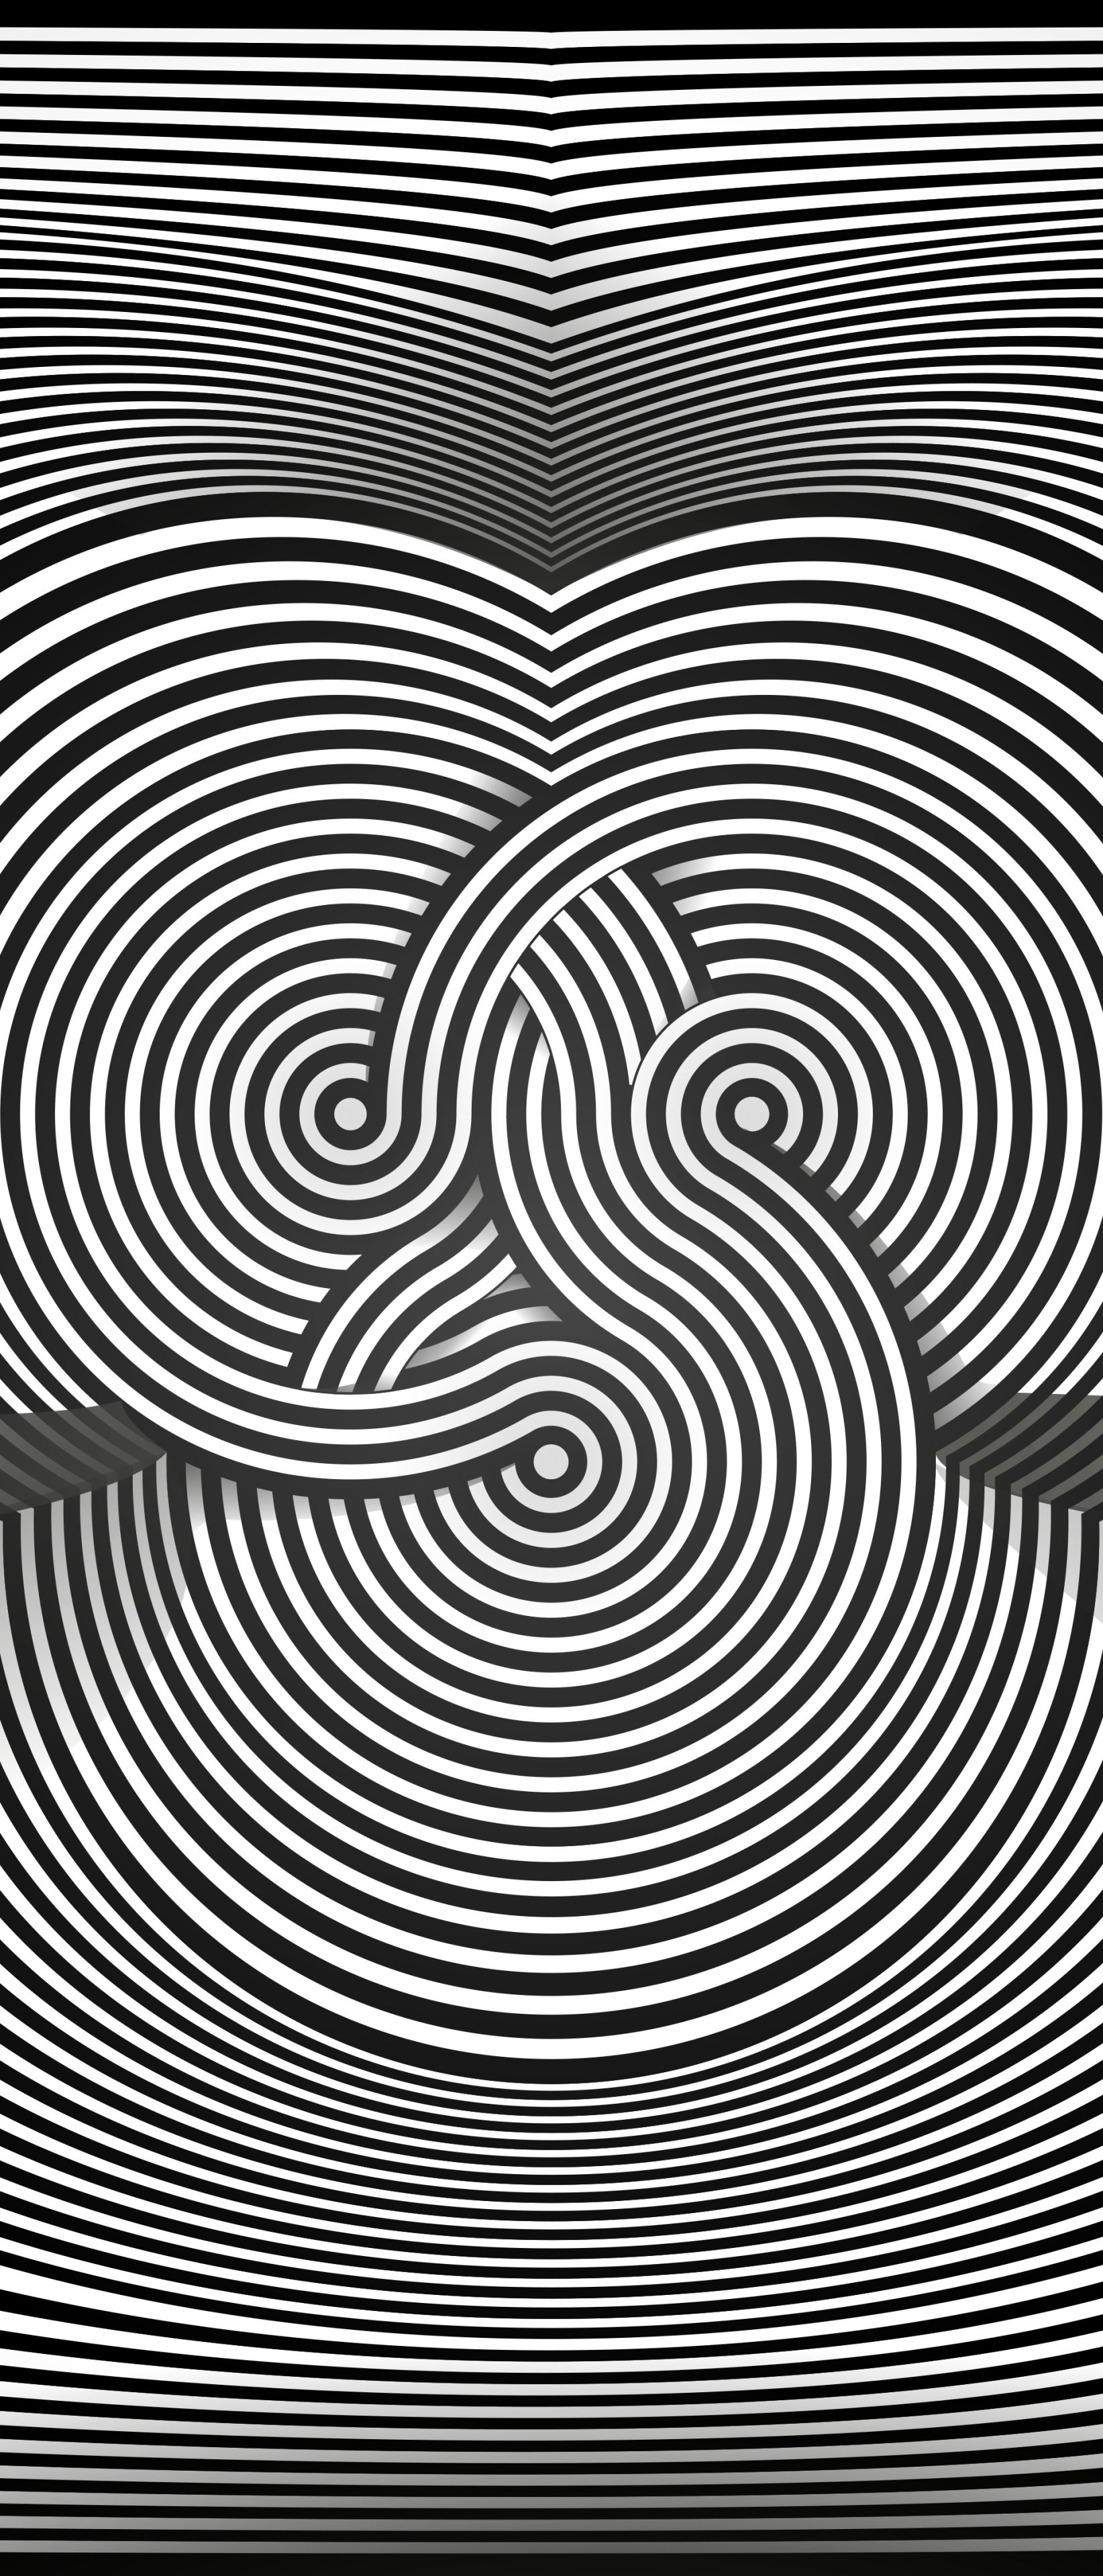 Optical illusion 4k ultra hd 16:10 wallpapers hd, desktop backgrounds  3840x2400, images and pictures